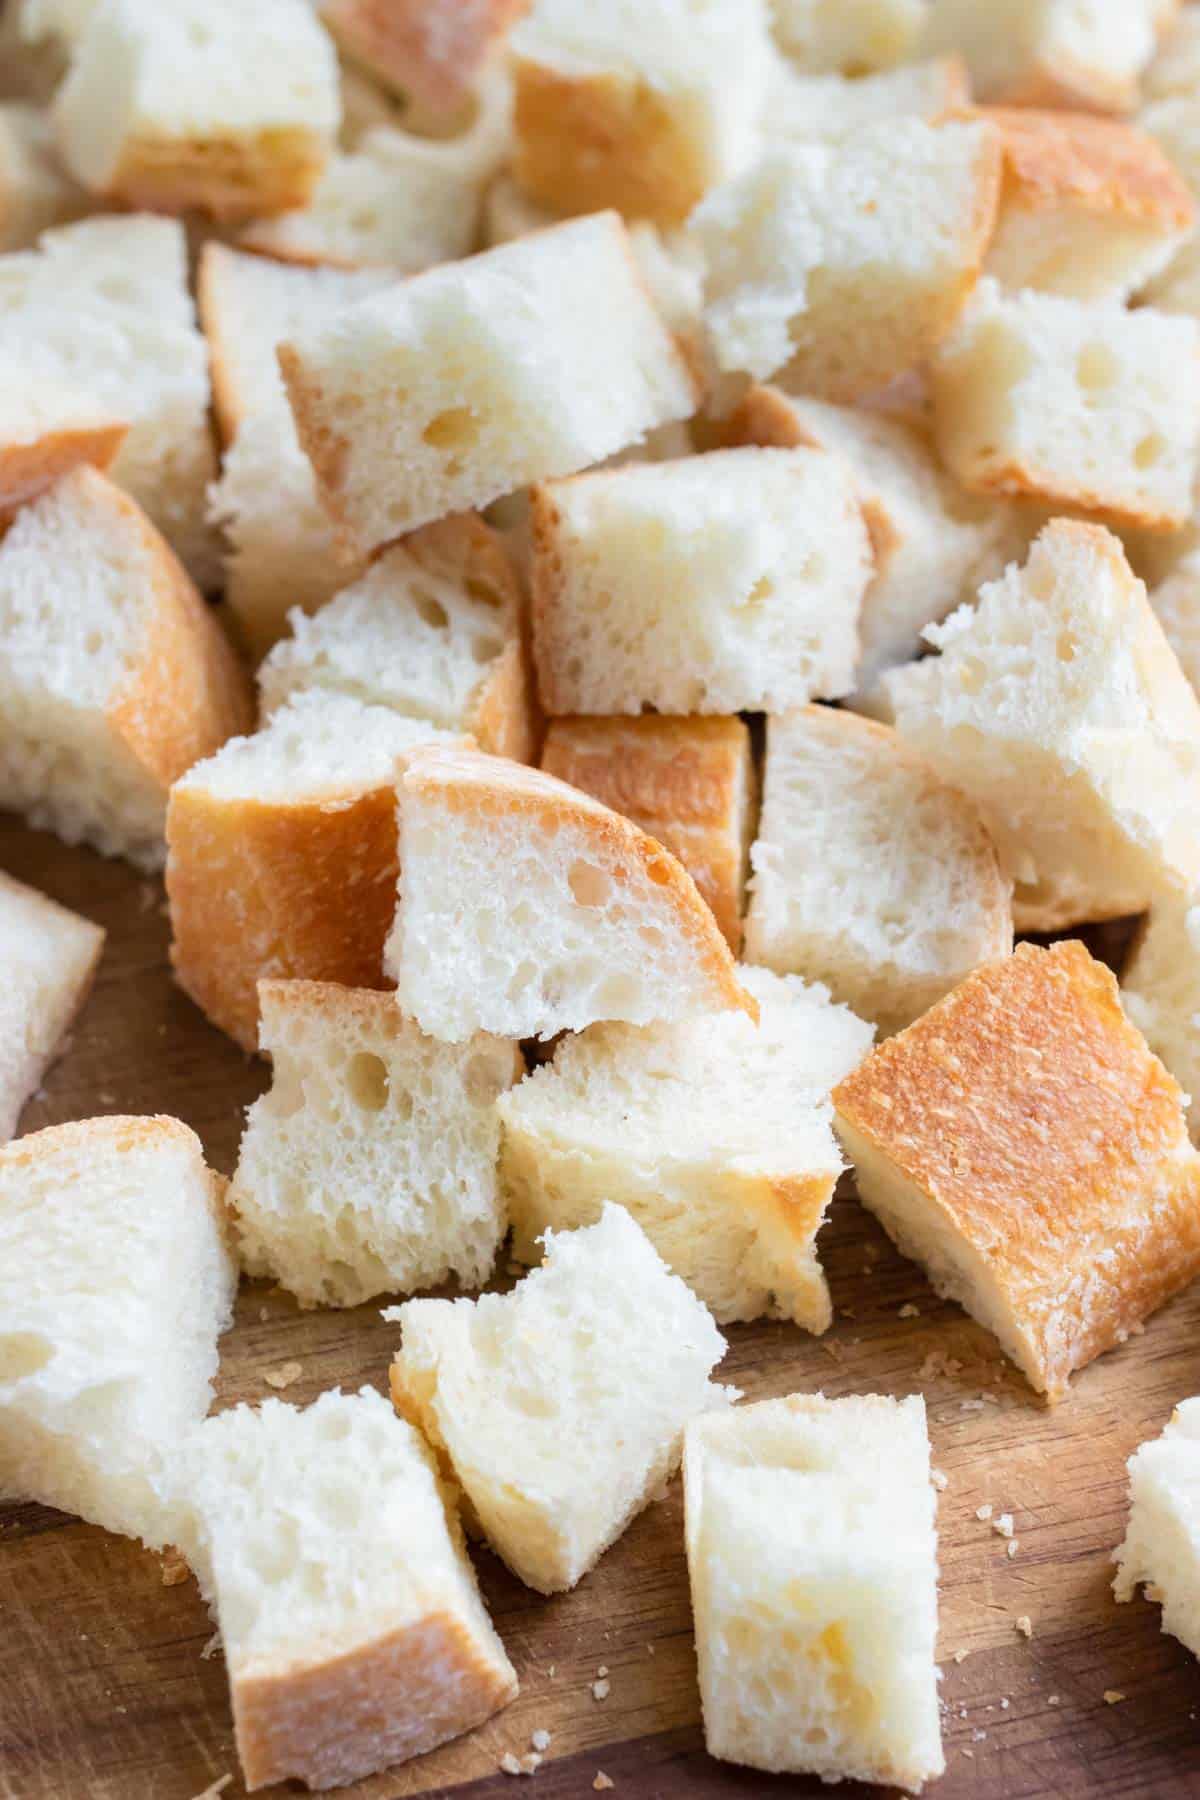 Cubes of bread are prepared for baking.